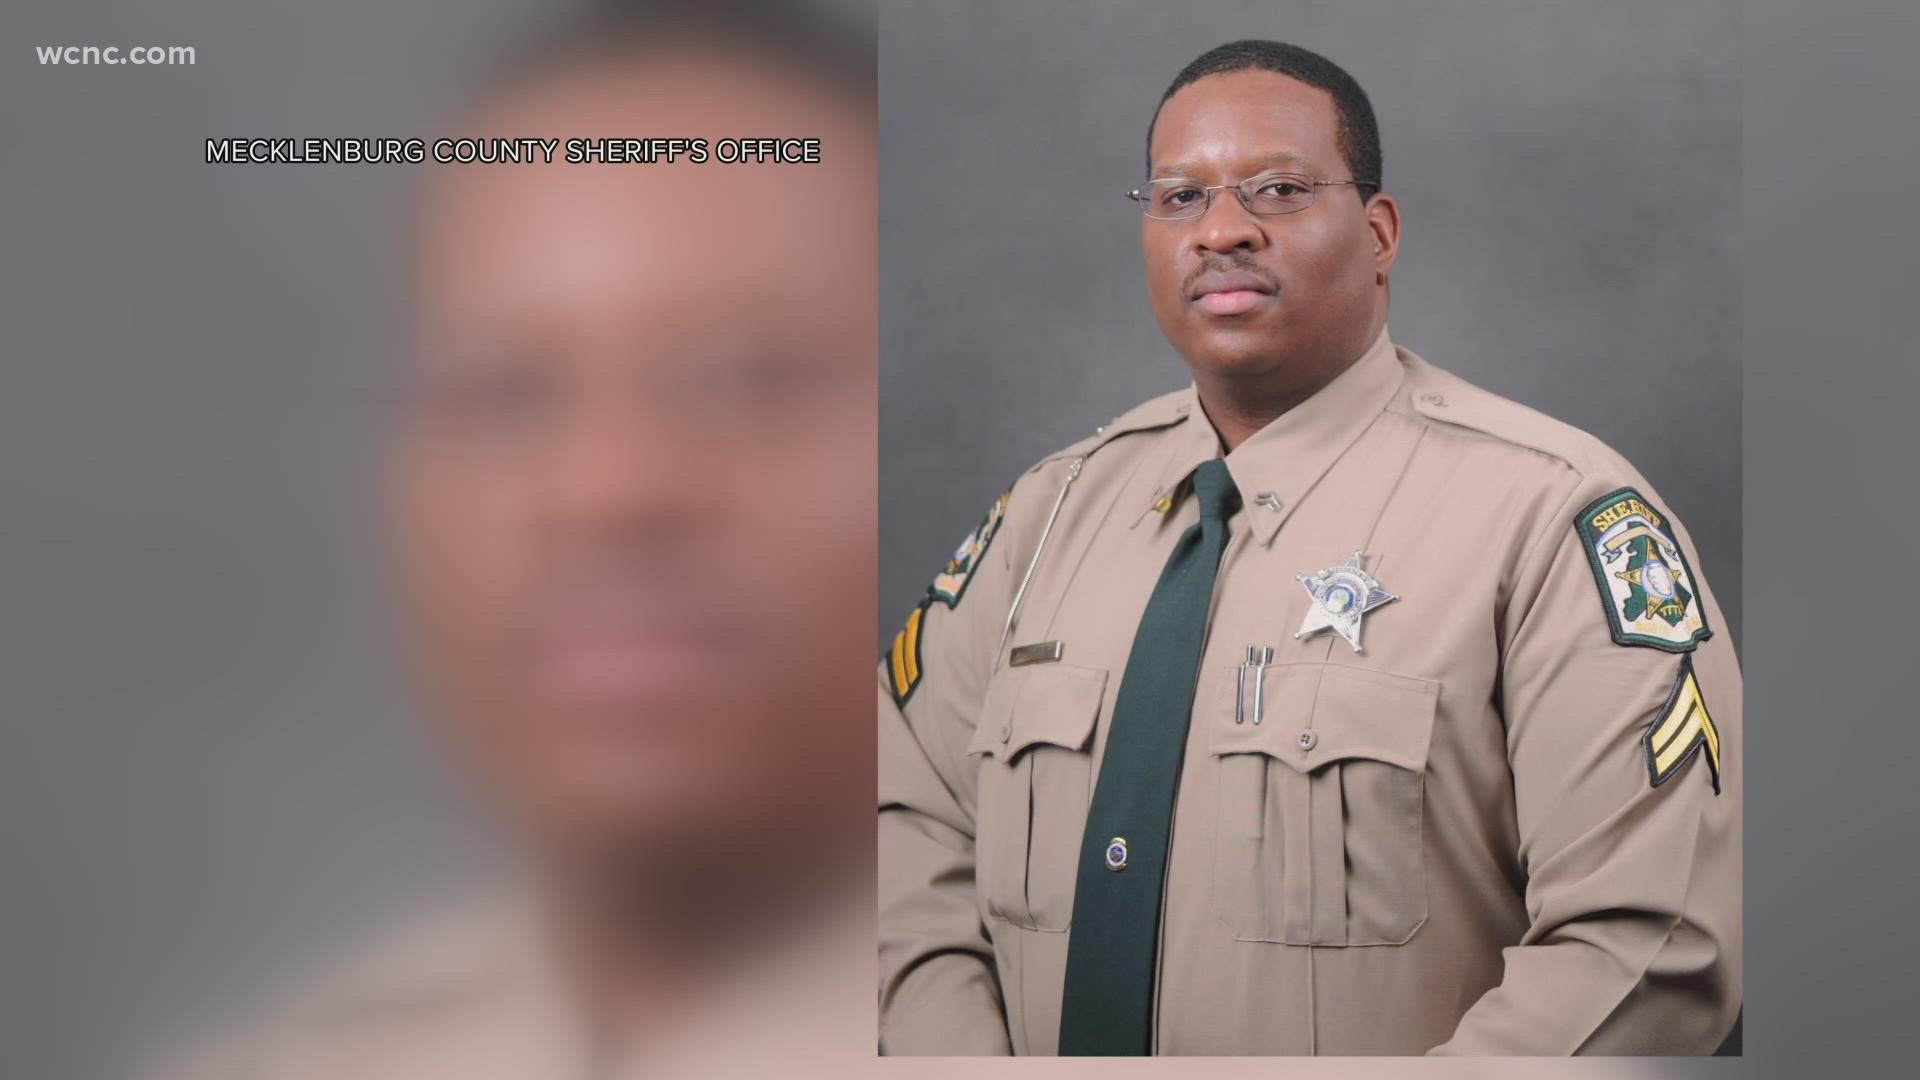 The Mecklenburg County Sheriff's Office says the deputy underwent successful surgery on Sunday and is recovering.